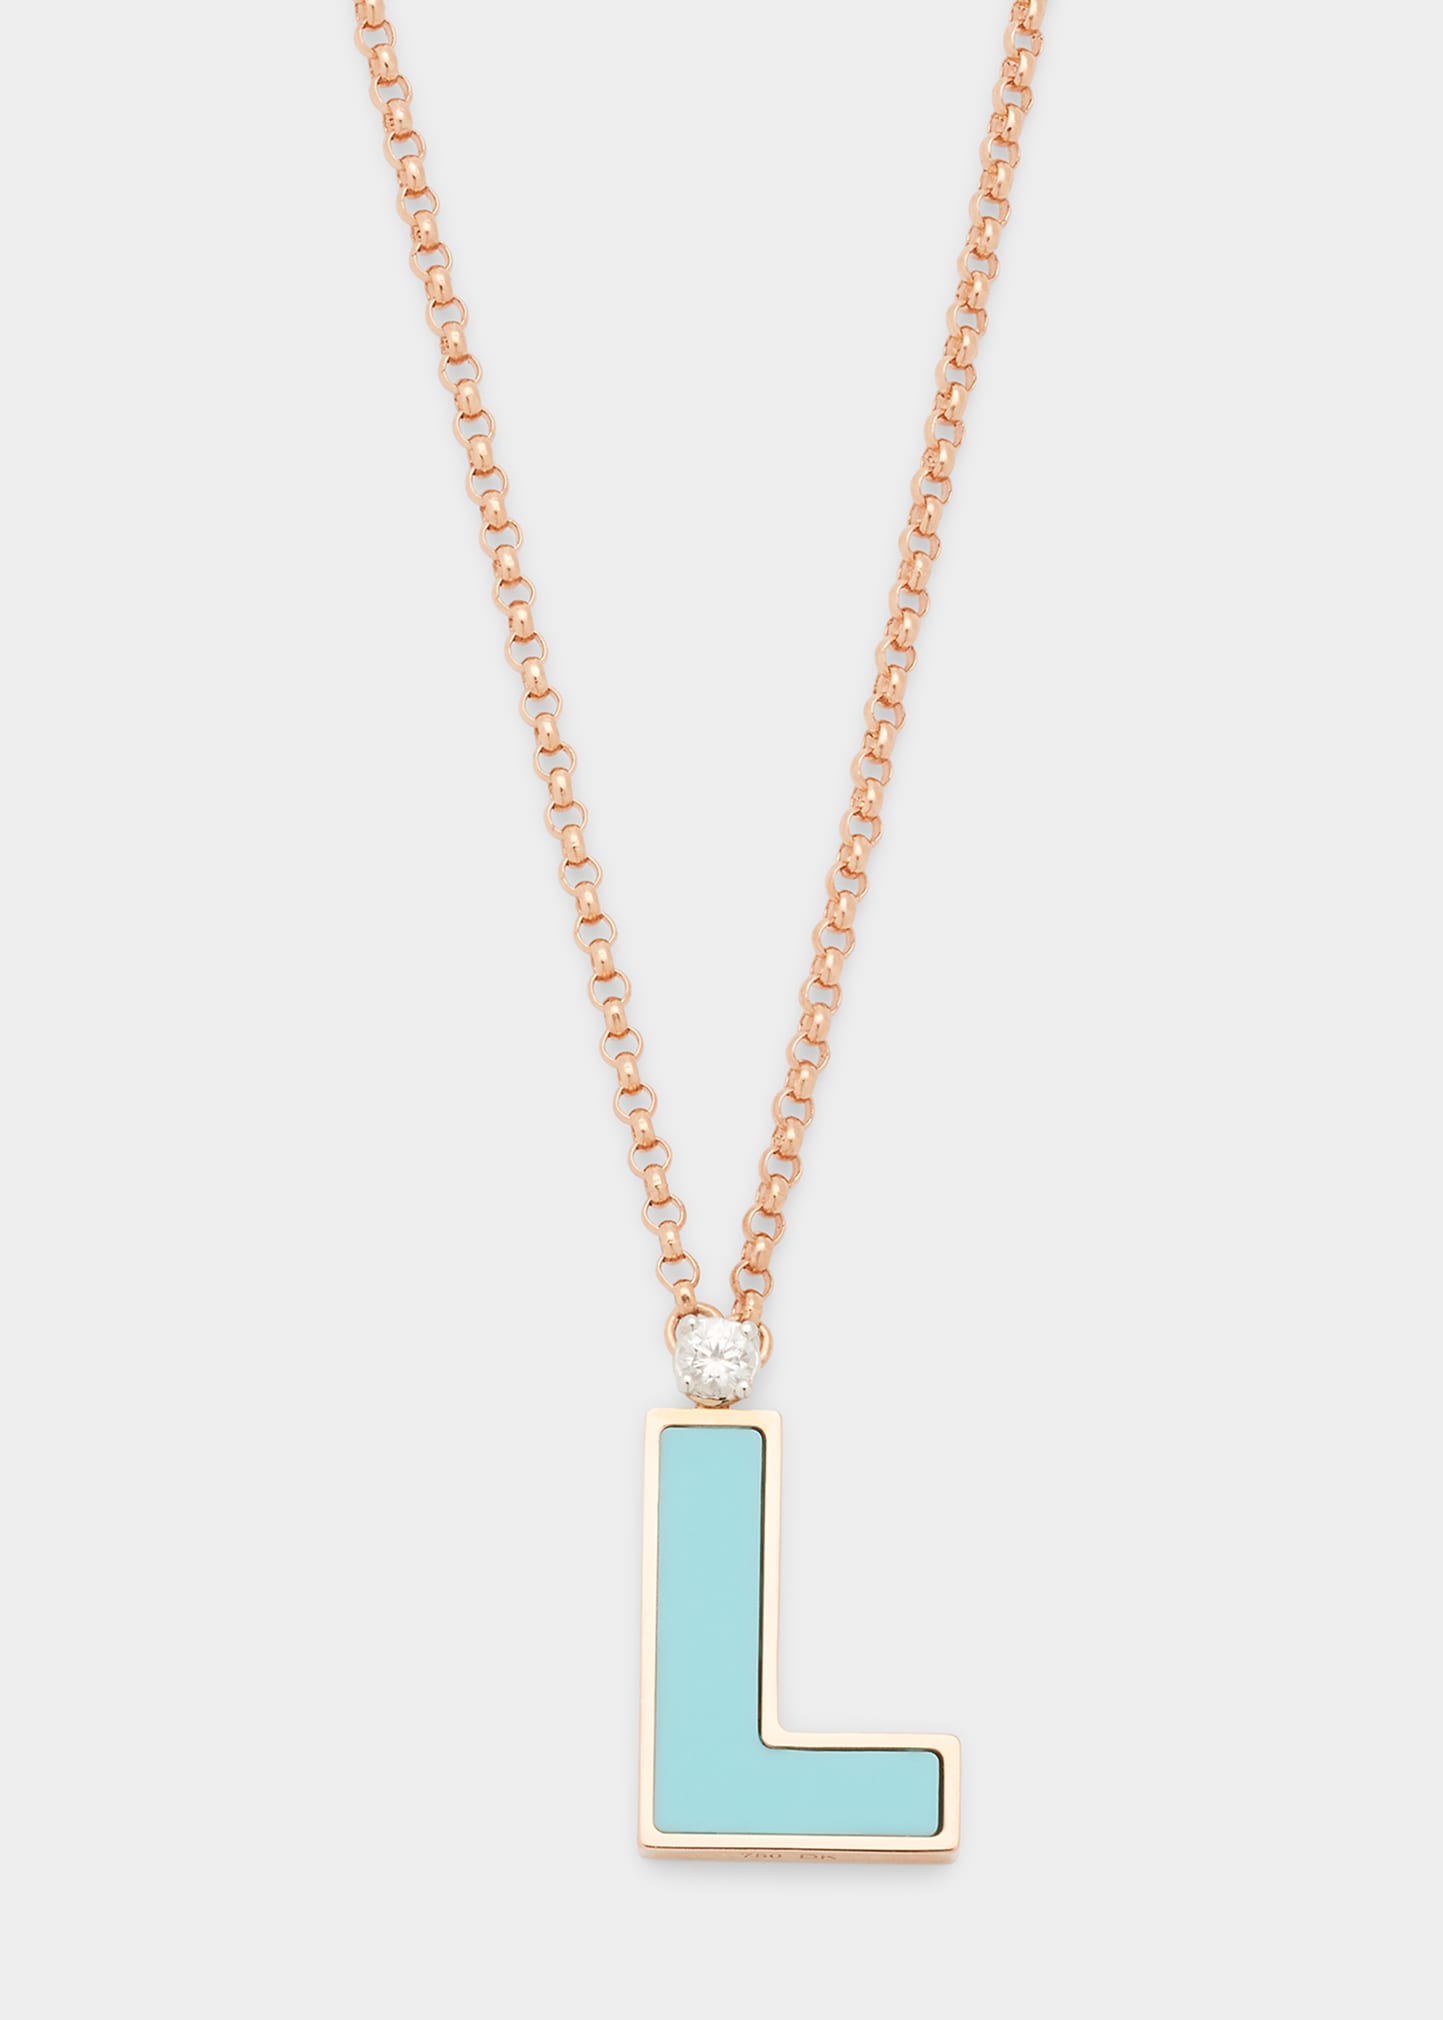 Rose Gold 'L' Letter Charm Necklace with Turquoise and White Sapphire